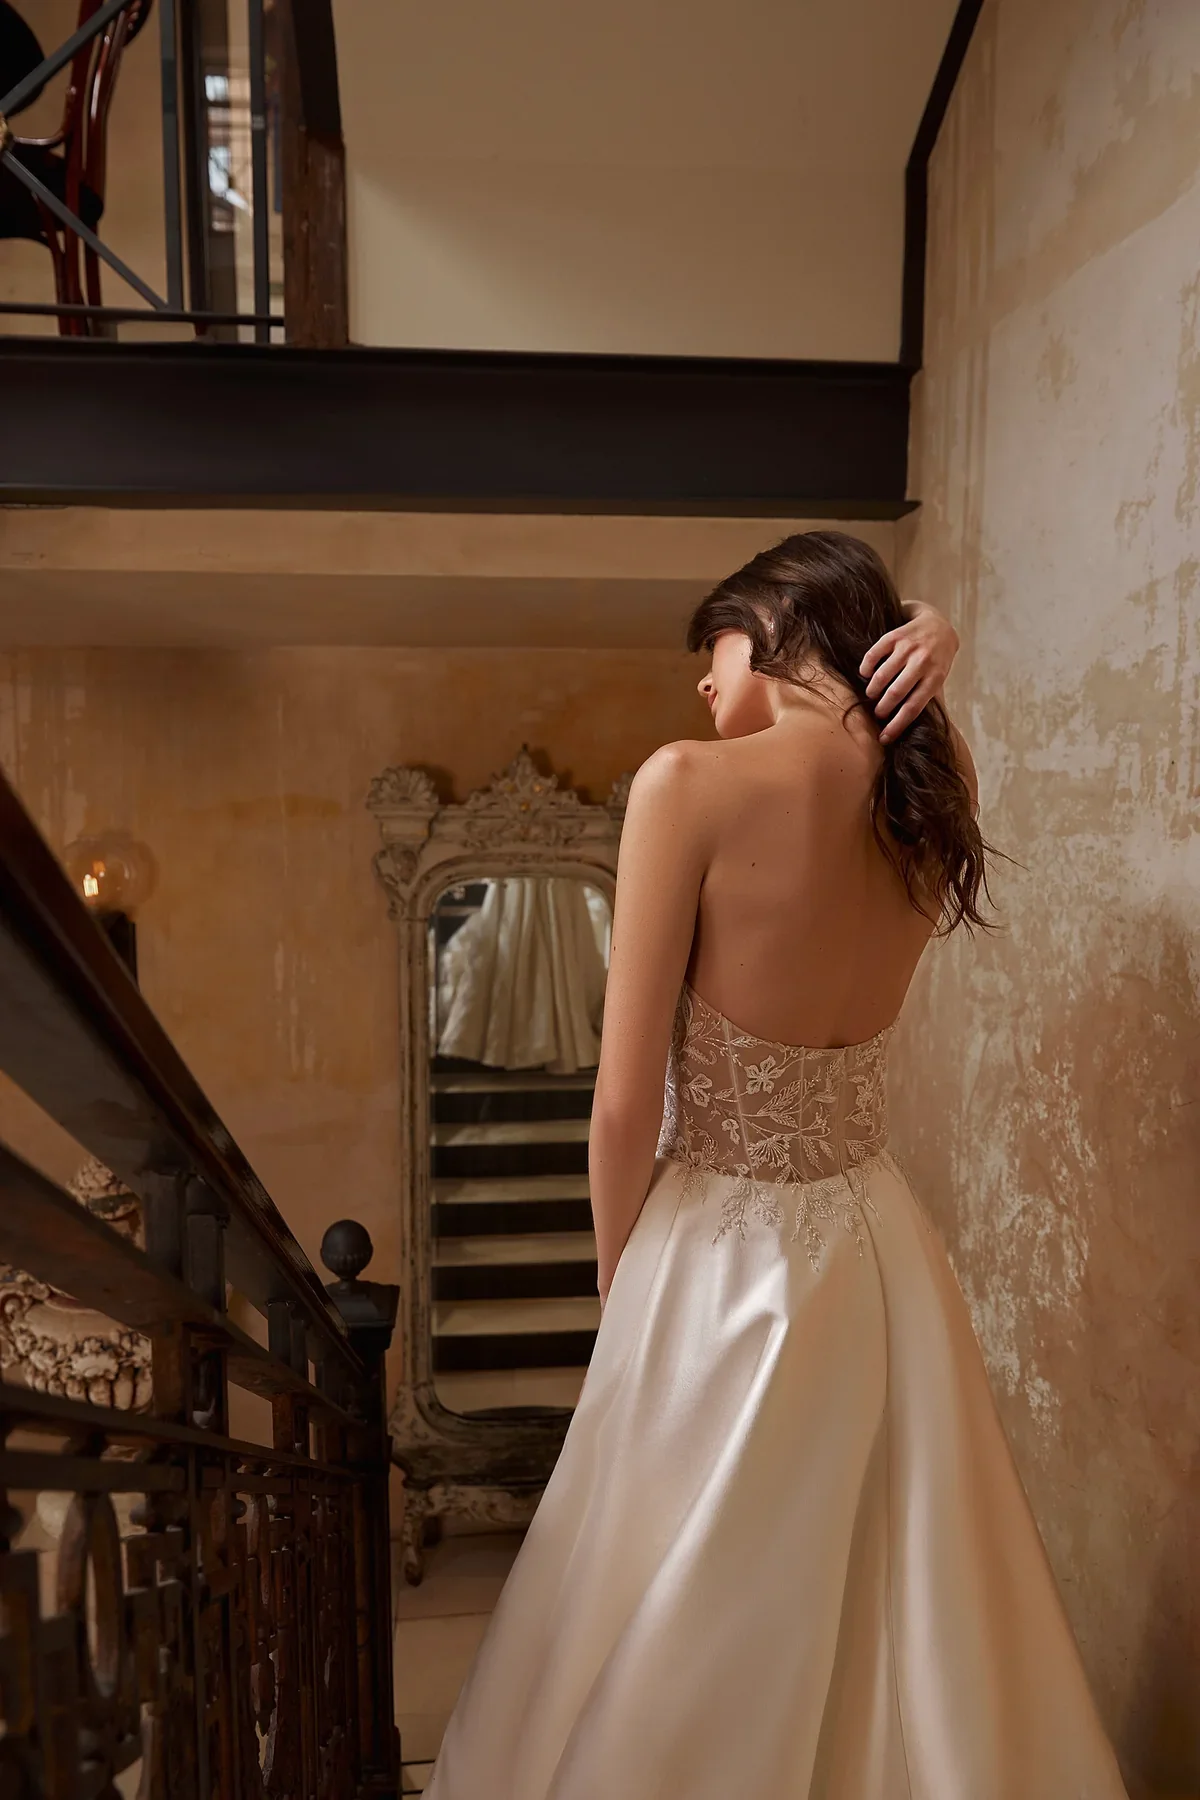 Hand-Beaded A-line Gown With Slit by Enaura Bridal - Image 2